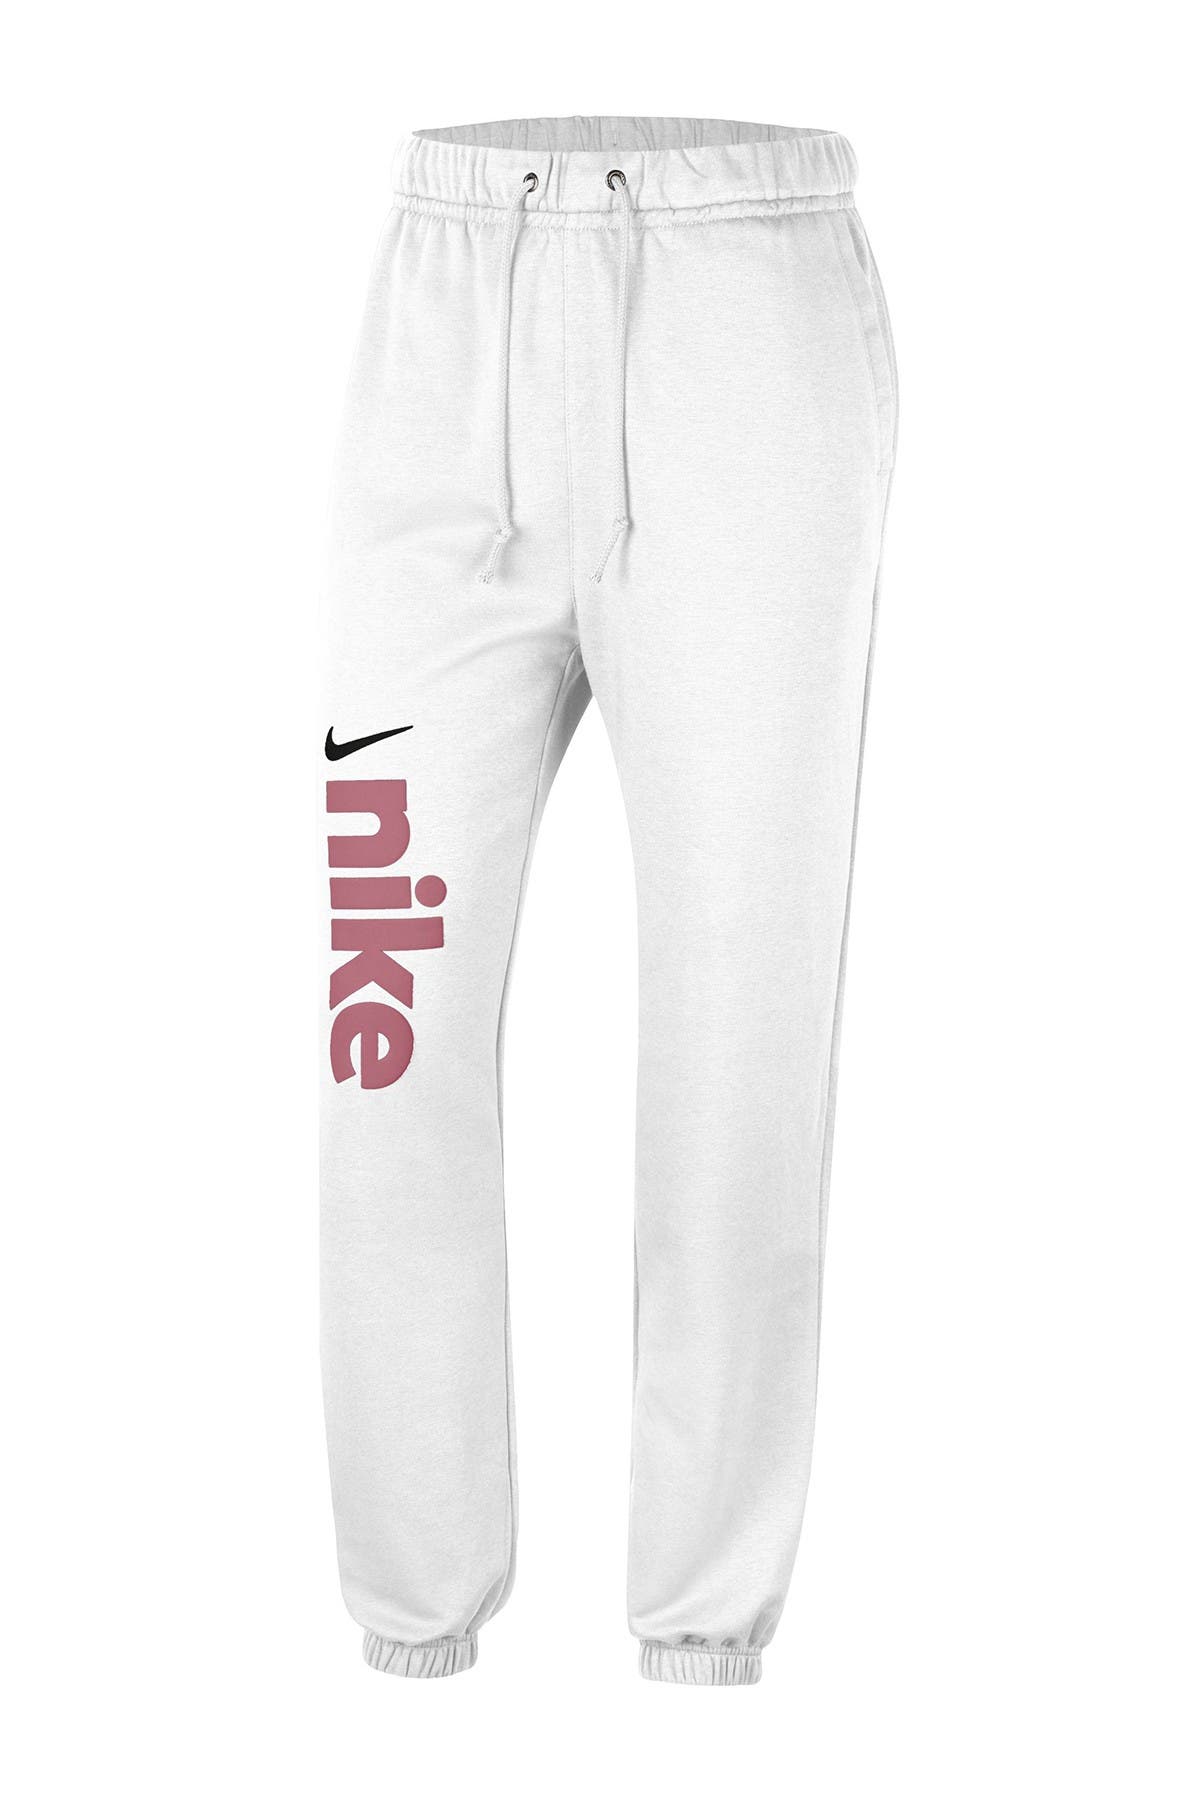 nordstrom nike joggers